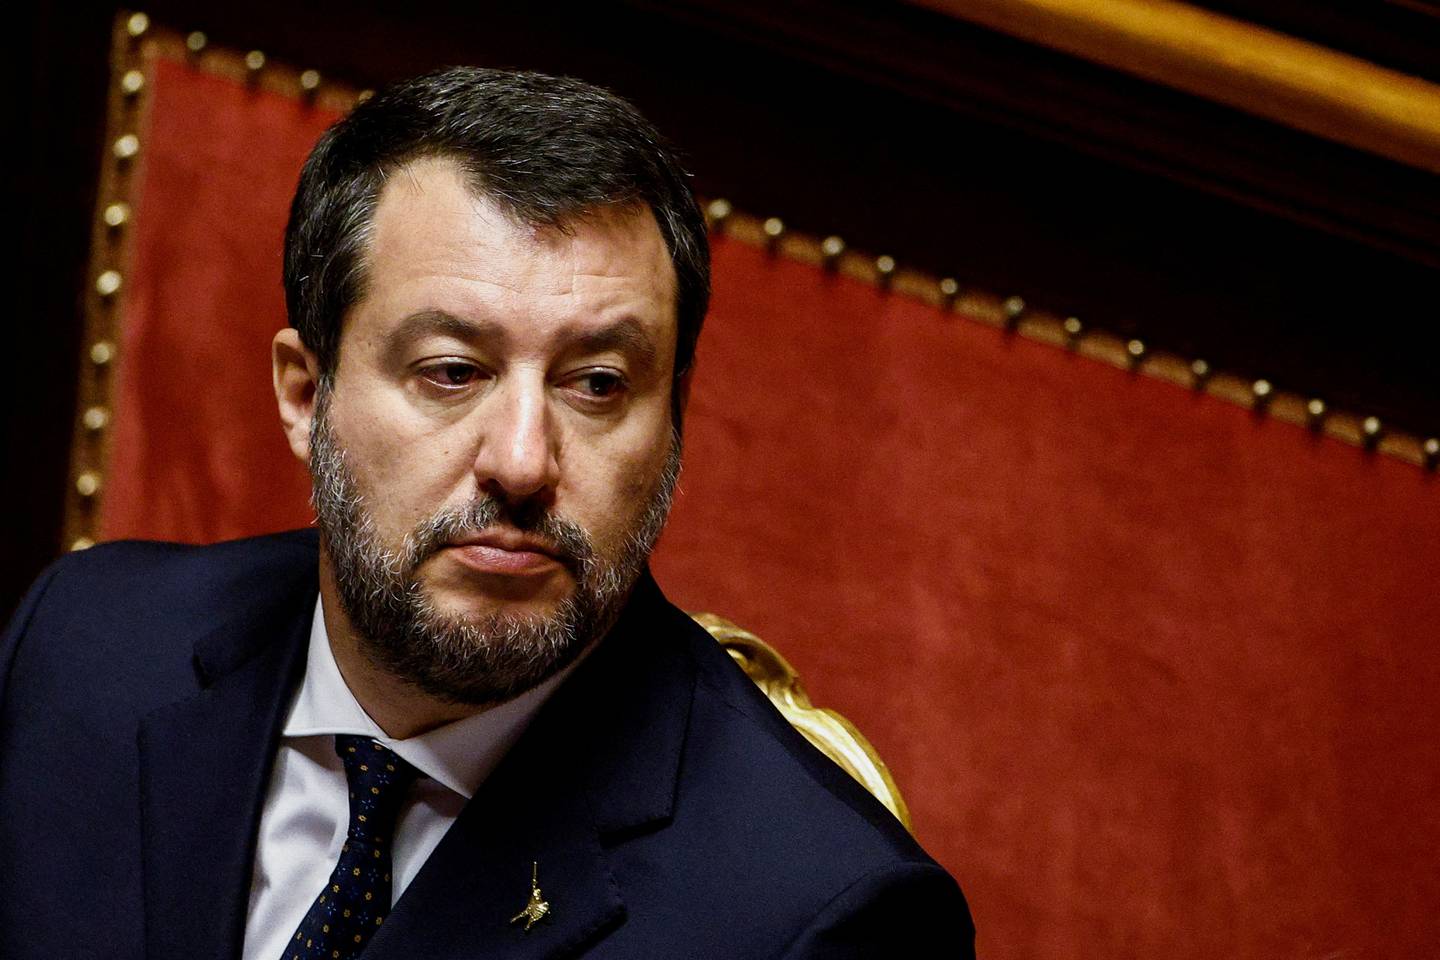 FILE PHOTO: Italy's Infrastructure Minister Matteo Salvini attends the upper house of parliament ahead of a confidence vote for the new government, in Rome, Italy, October 26, 2022. REUTERS/Guglielmo Mangiapane/File Photo